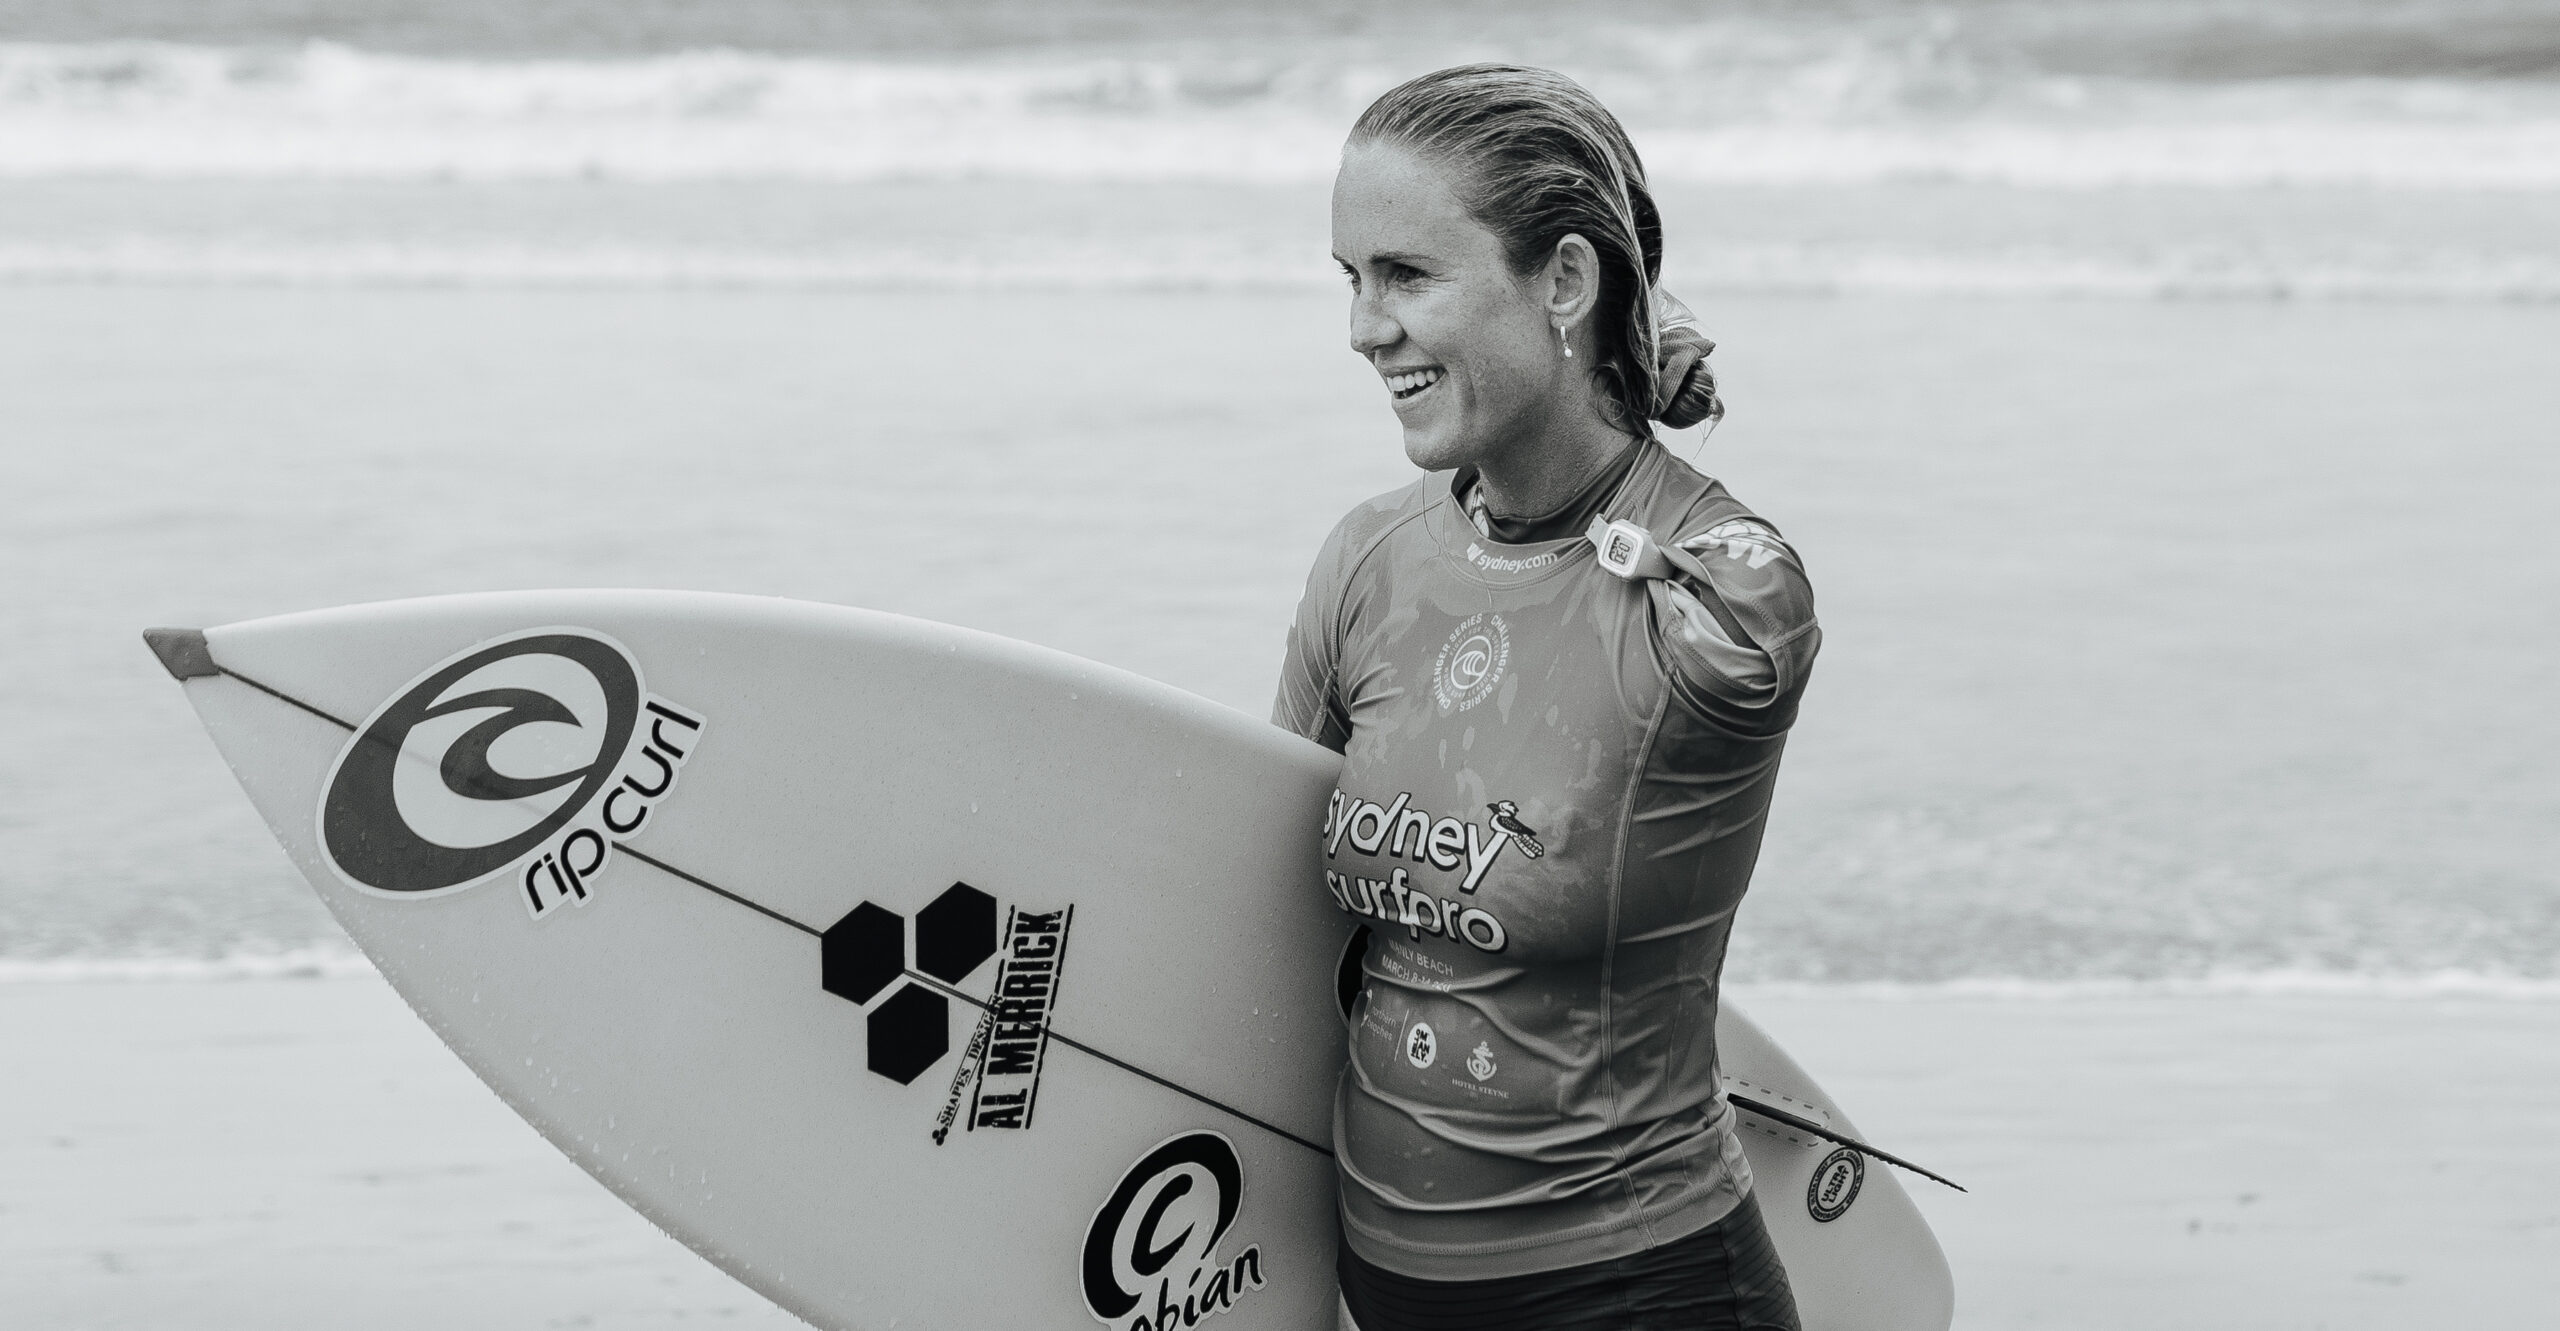 EXCLUSIVE: Pro Surfer Makes Different Kind of Waves as Brand Ambassador for Pro-Life Diaper Company